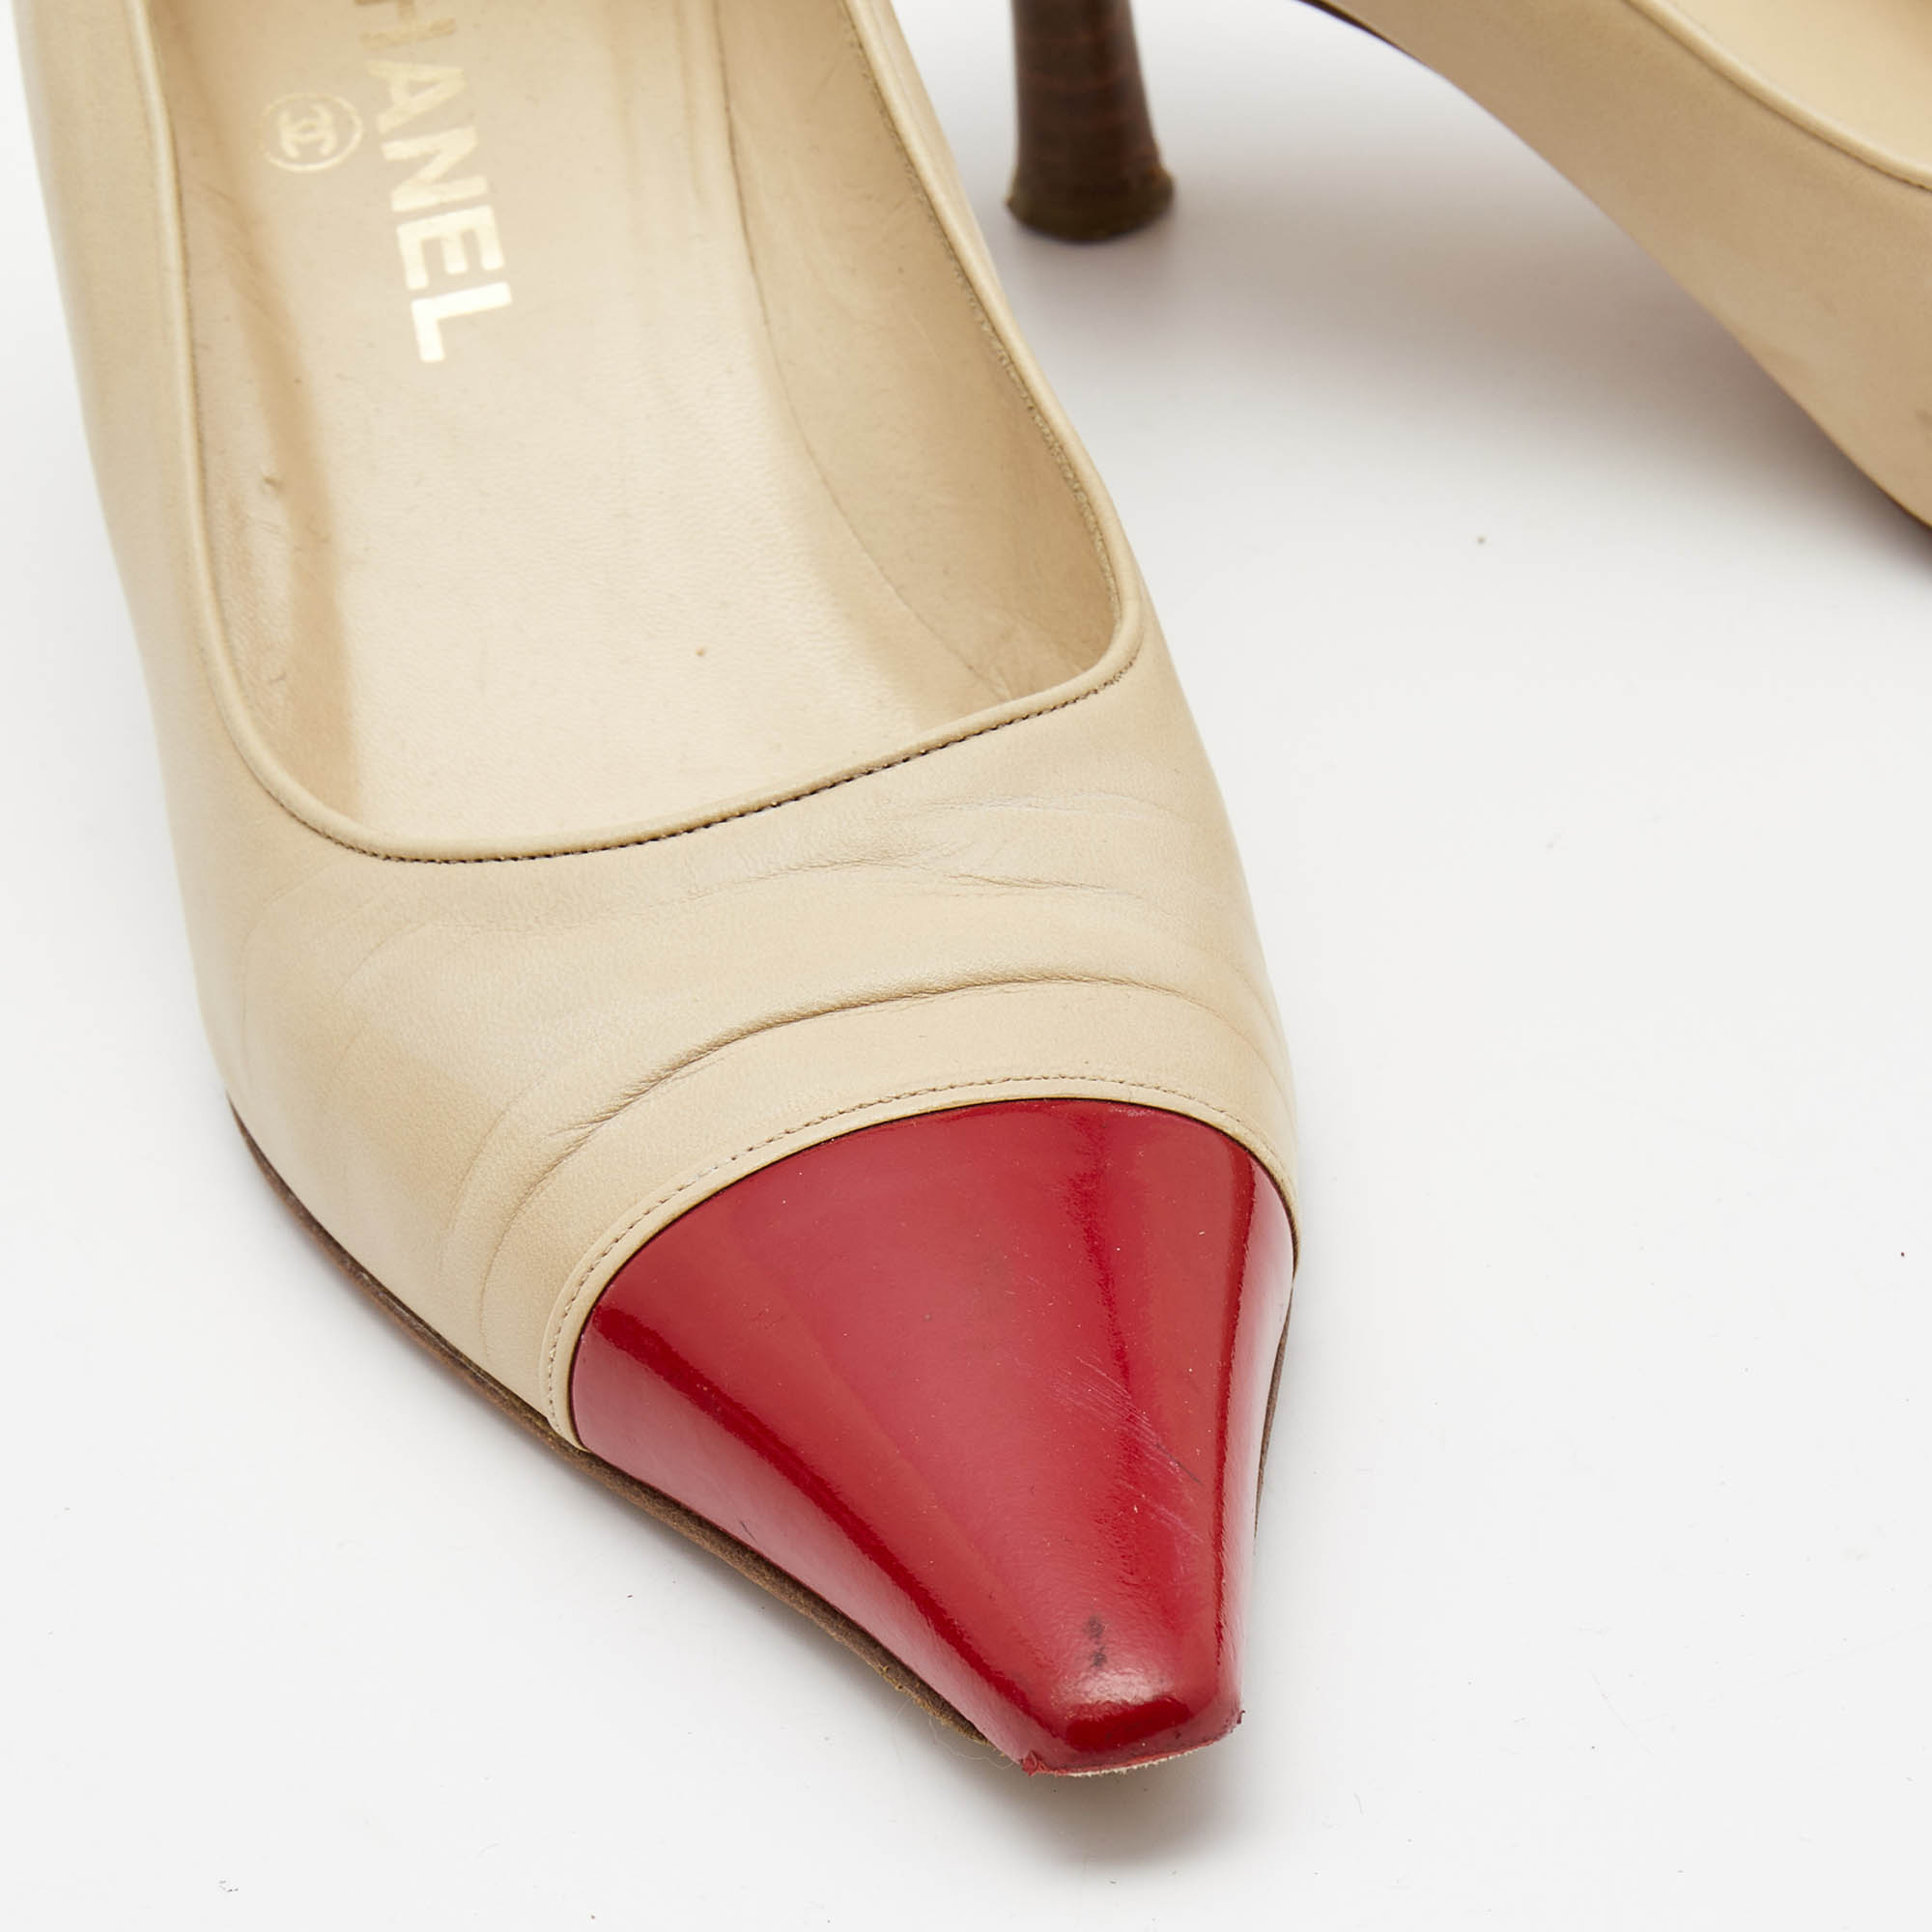 Chanel Beige/Red Patent And Leather Pointed Toe Pumps Size  38.5